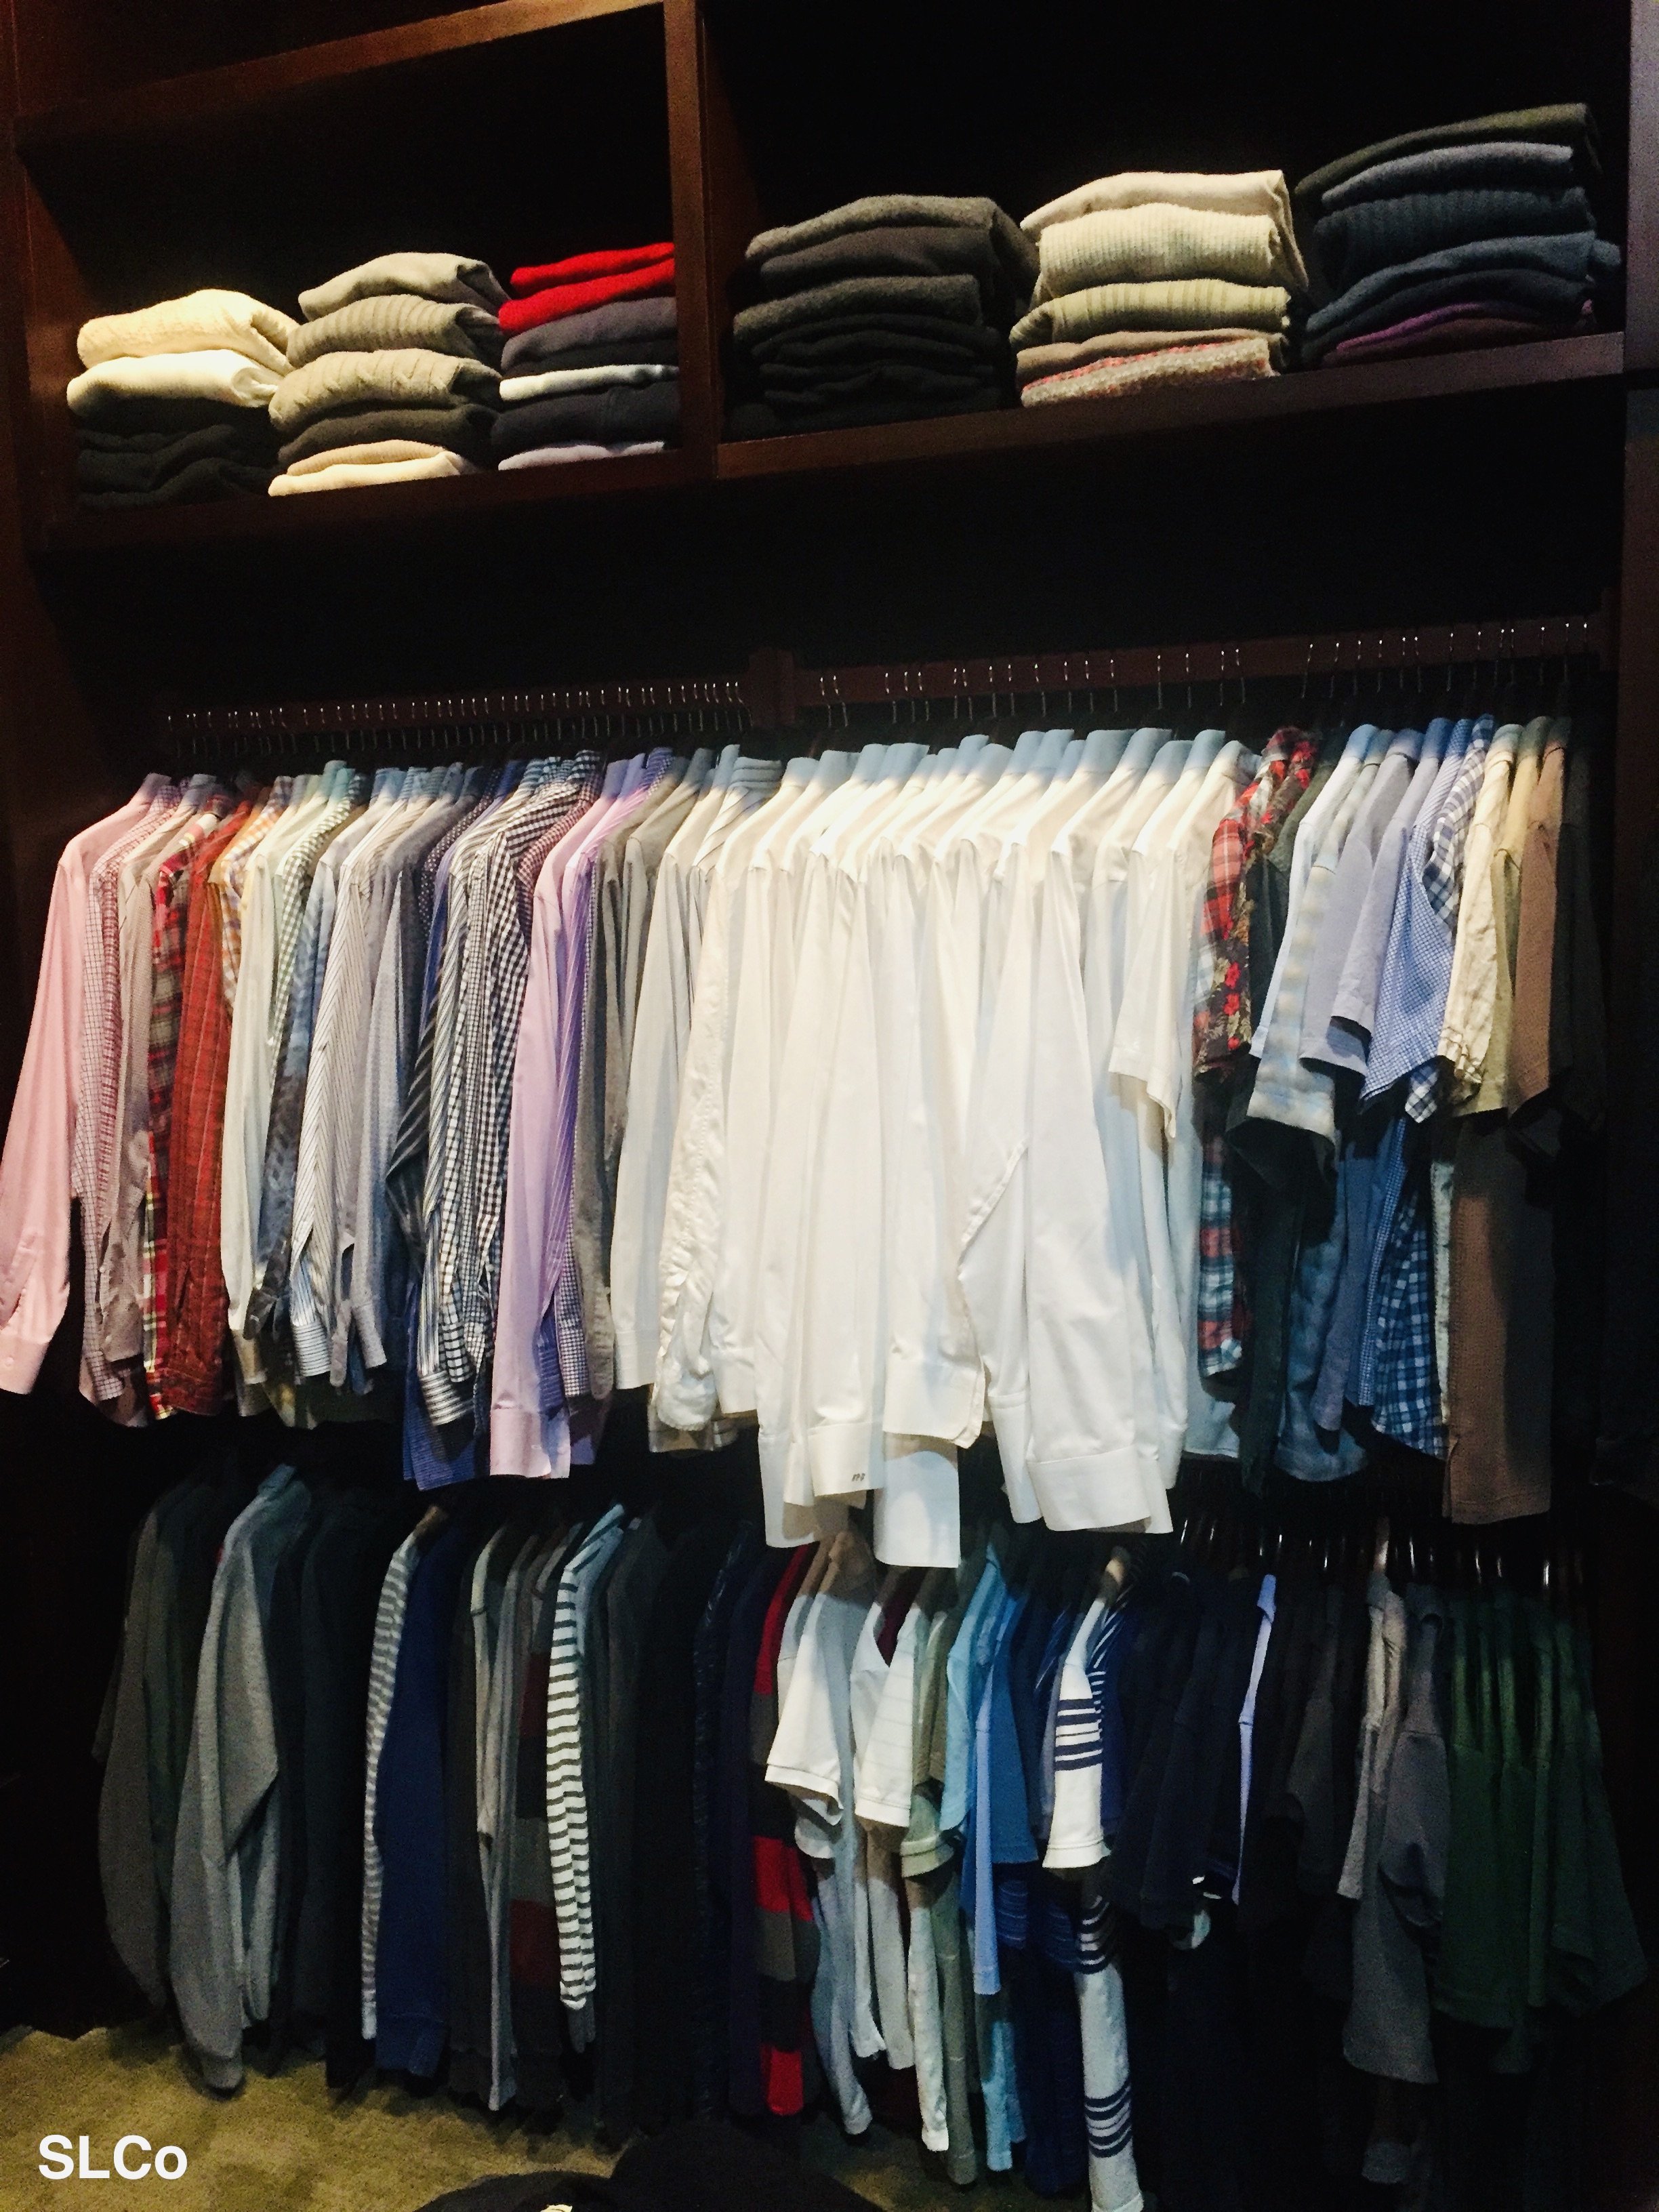 Two rows of dress shirts hanging and folded dress shirts on wooden shelves above